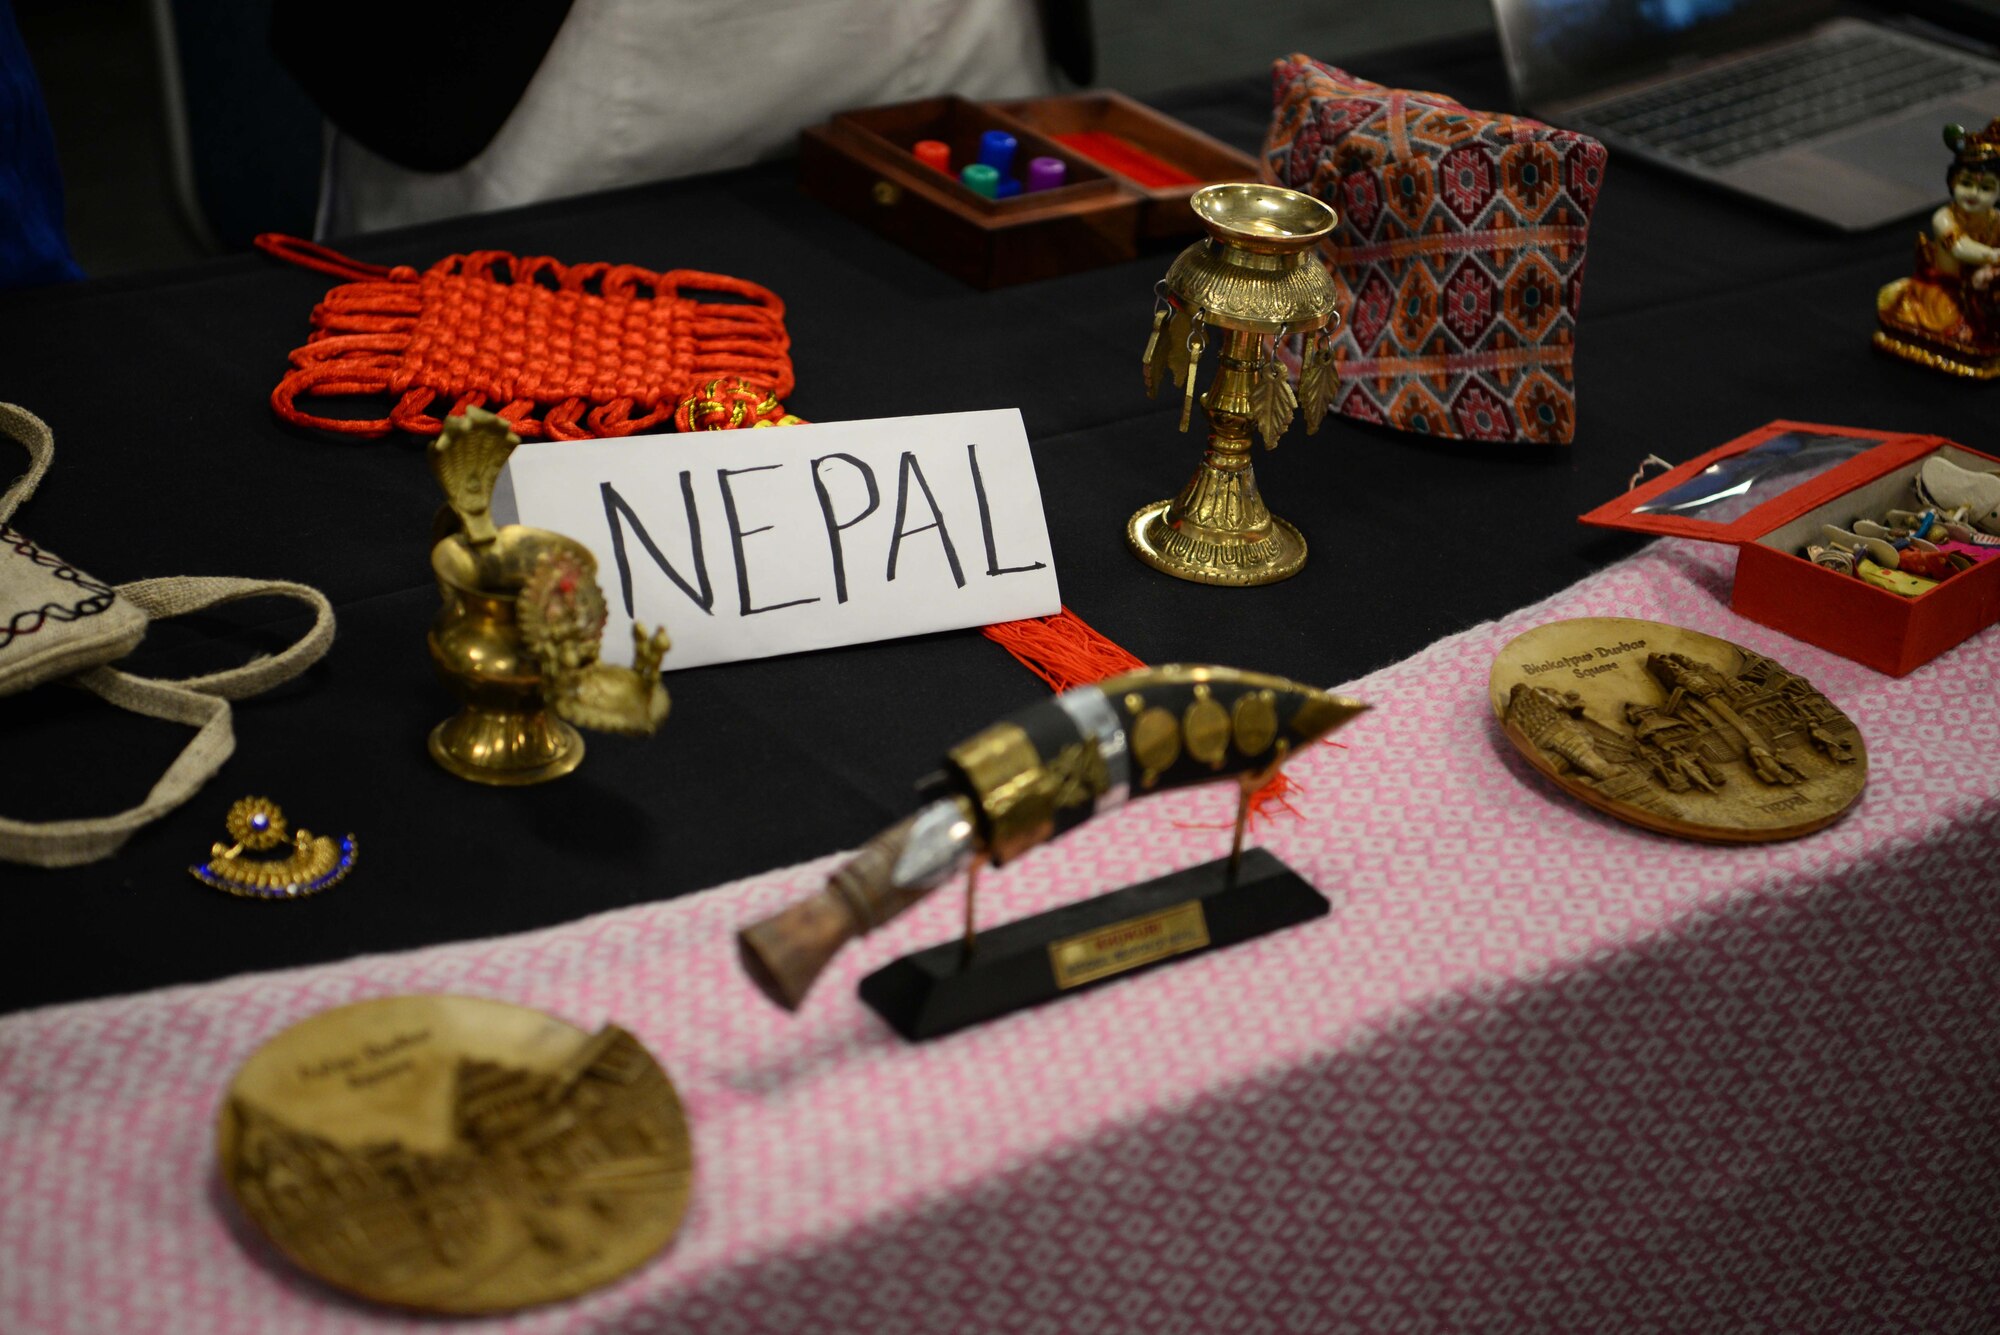 Nepal ornaments on display, June 7, 2019, on Columbus Air Force Base, Miss. The event brought together many volunteers by getting the community involved to help out with the booths and share bits and pieces from their cultures. (U.S. Air Force photo by Airman 1st Class Jake Jacobsen)